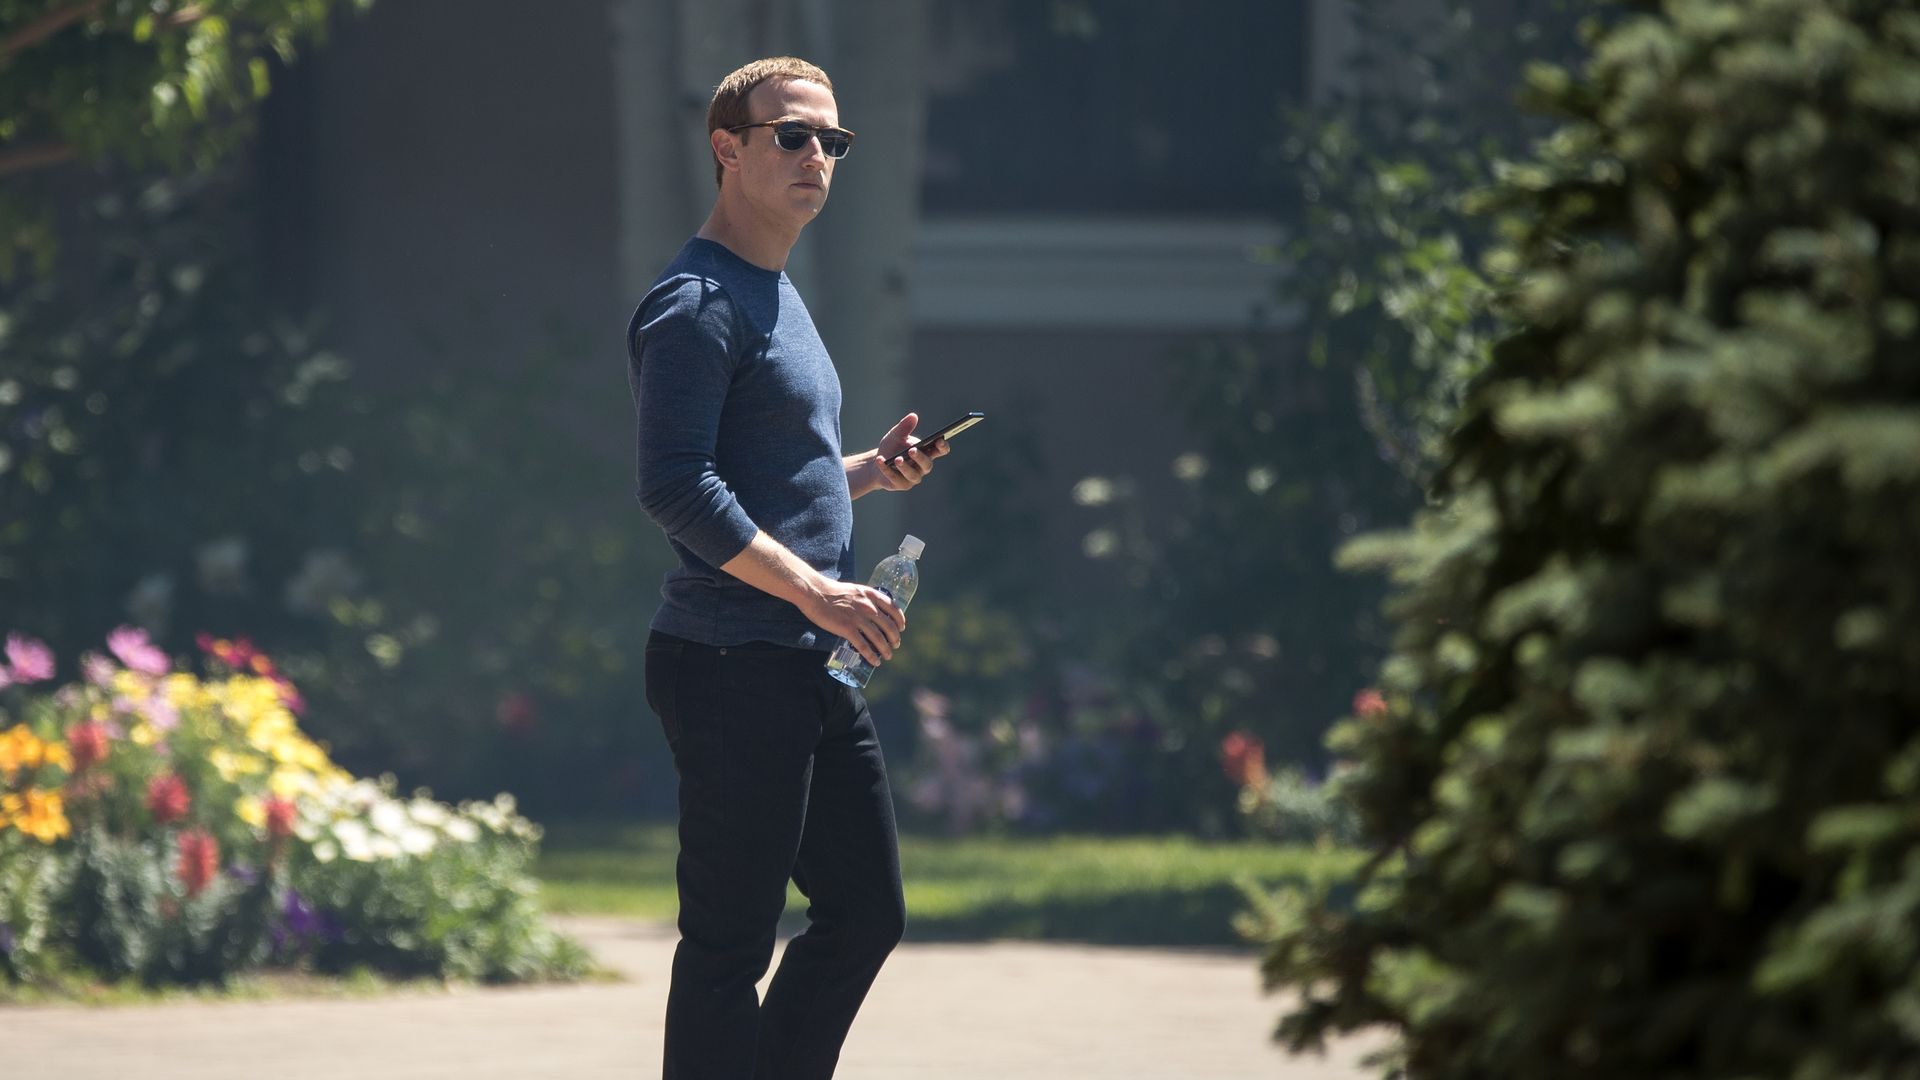 Mark Zuckerberg stands outside holding his phone